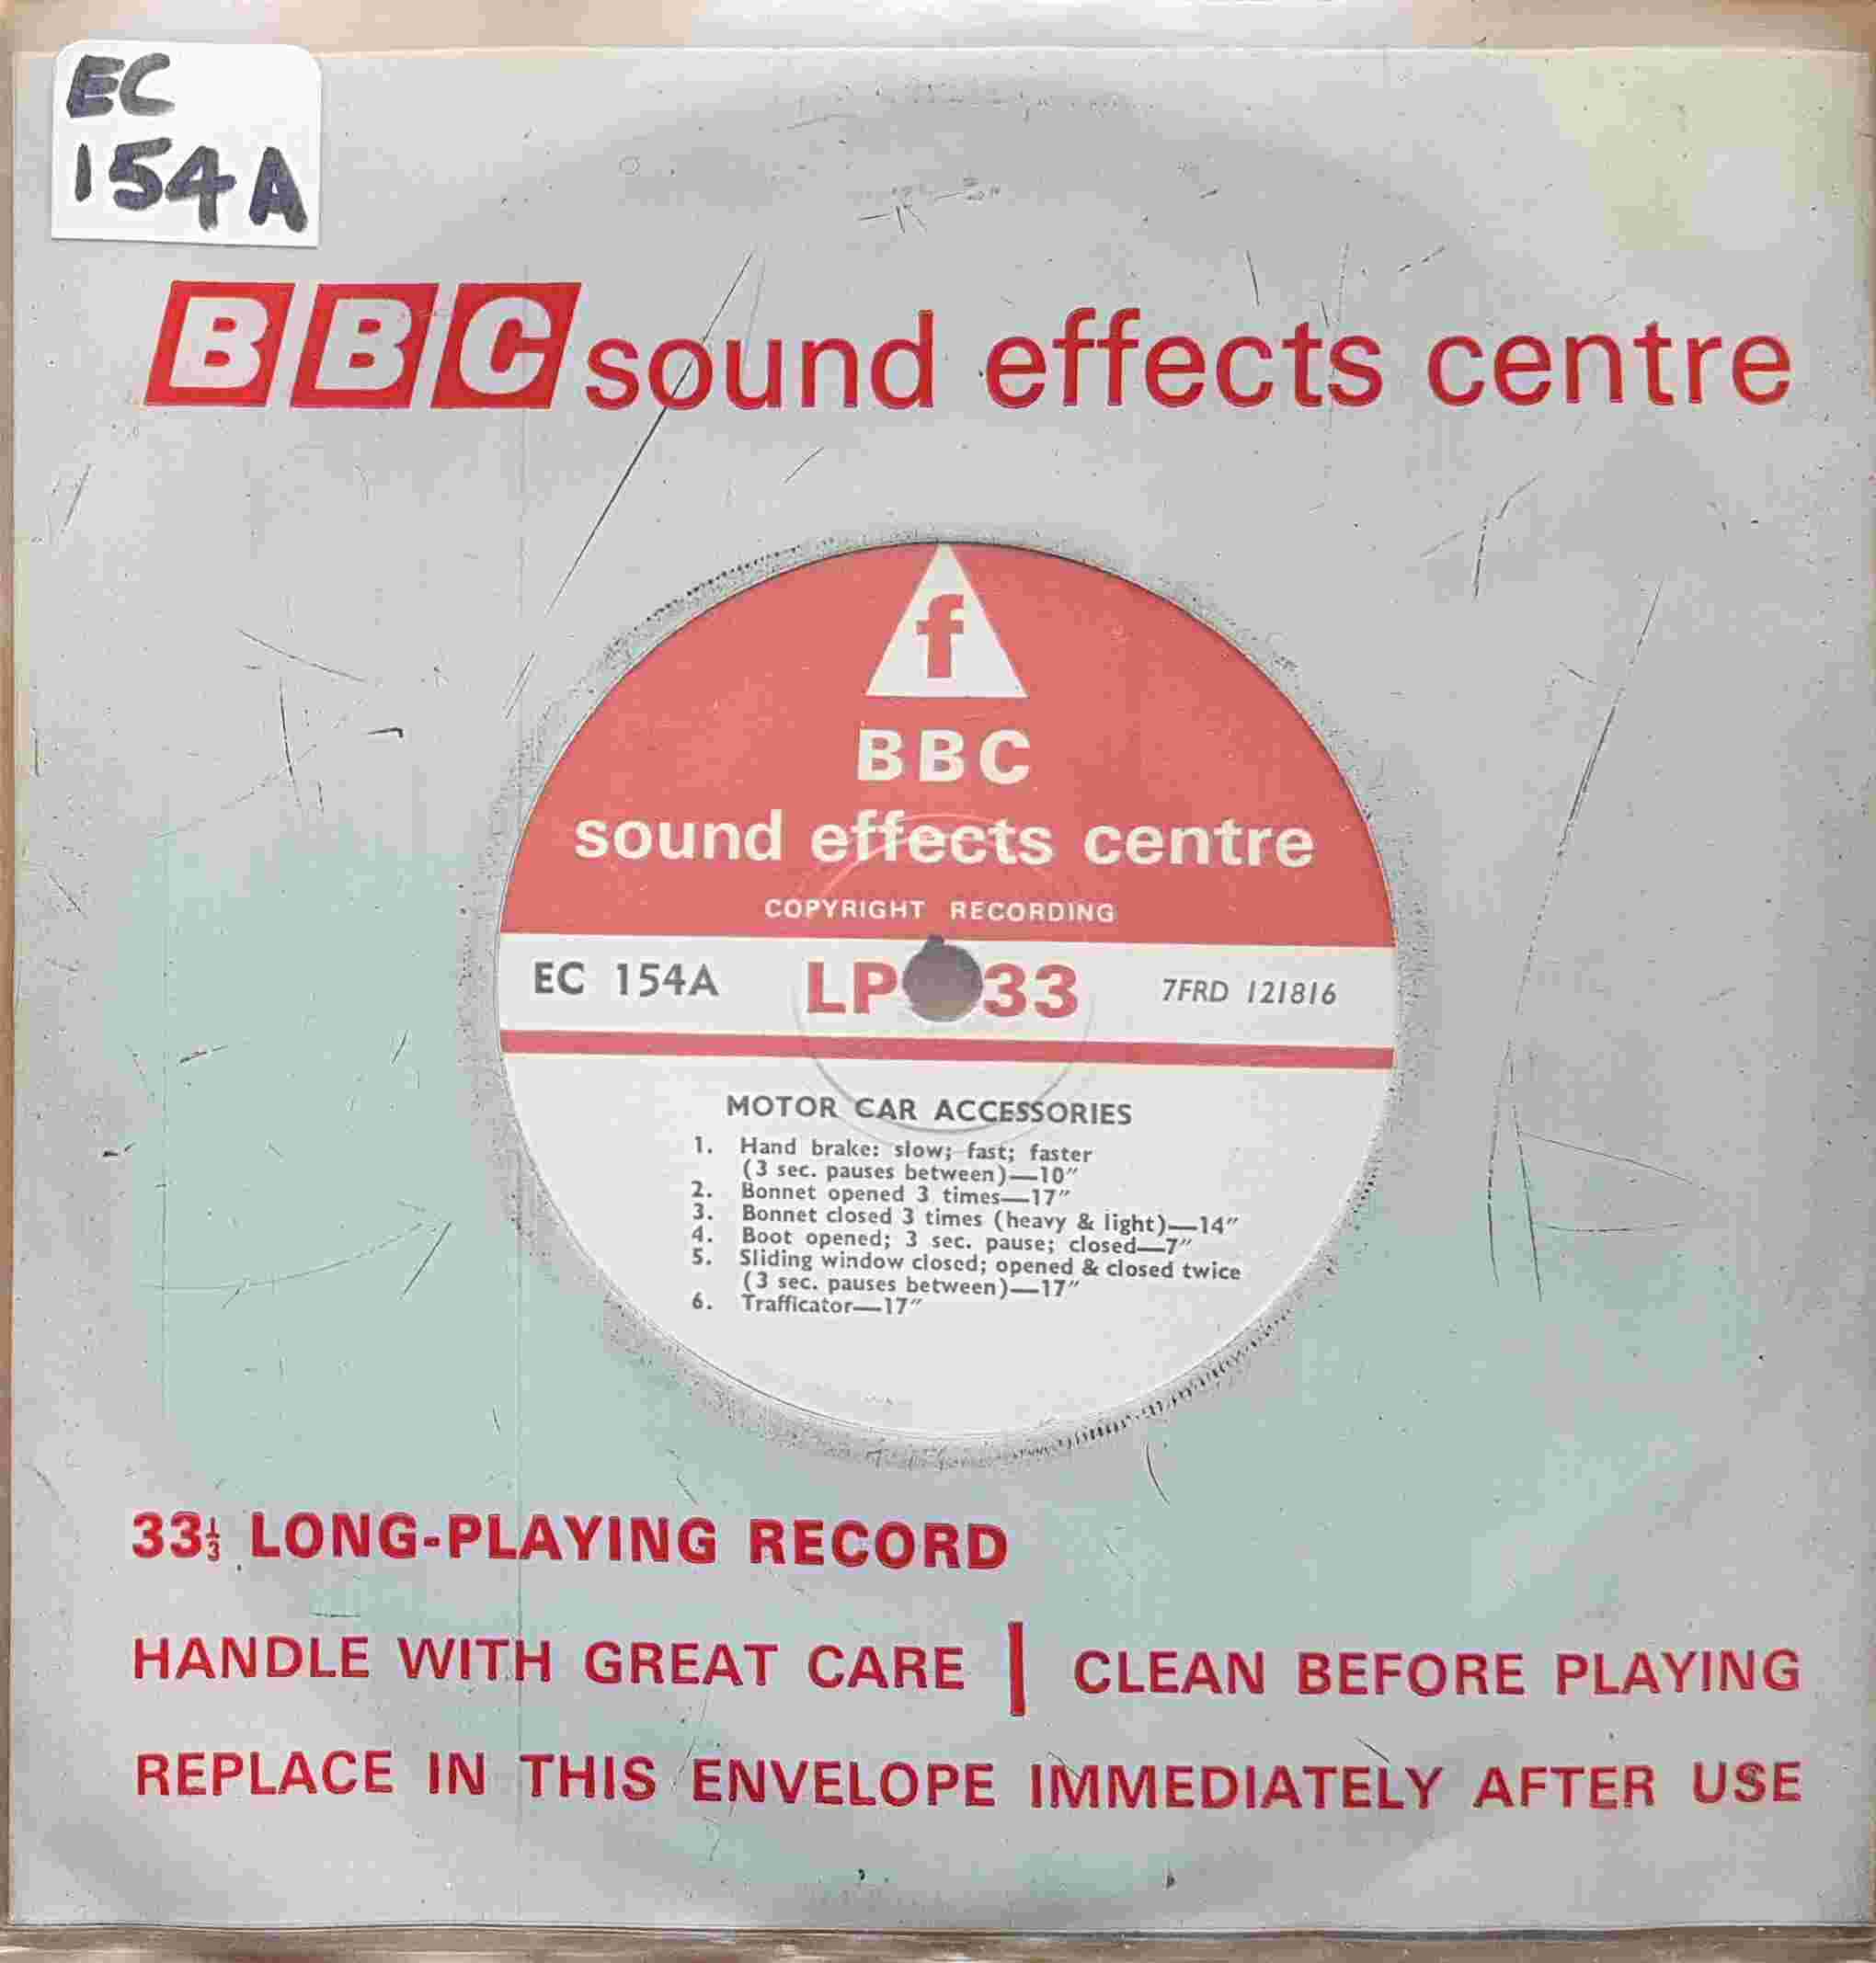 Picture of EC 154A Motor car accessories by artist Not registered from the BBC singles - Records and Tapes library